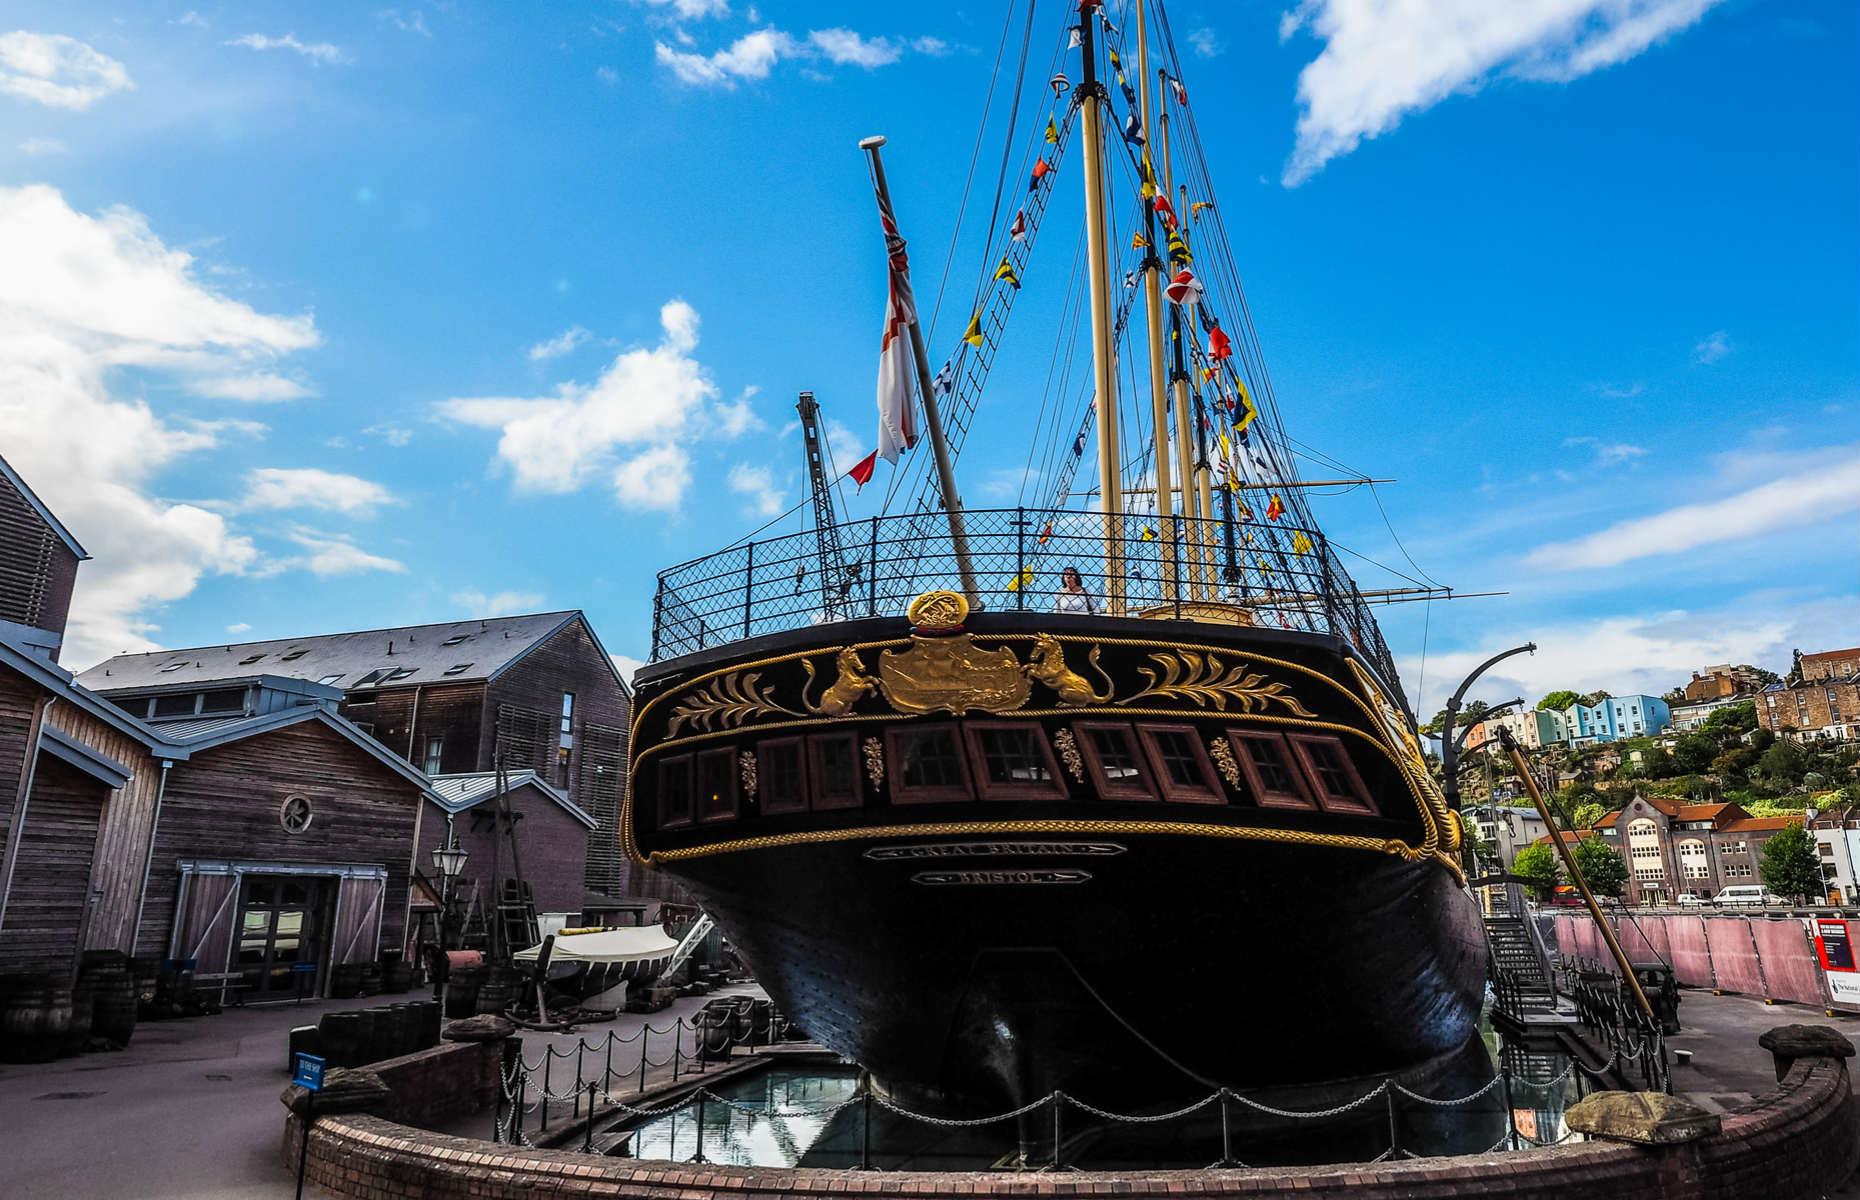 <p>The ship was converted into a cargo vessel and remained in use as a storage ship until 1933, before being left to rust after a failed rescue mission. But in 1970, a landmark salvage effort brought her back to life. She was returned to the original Great Western Dockyard in Bristol, and now sits as an engaging museum in the city's historic harbor, with her passenger cabins and dining halls restored to their original glory.</p>